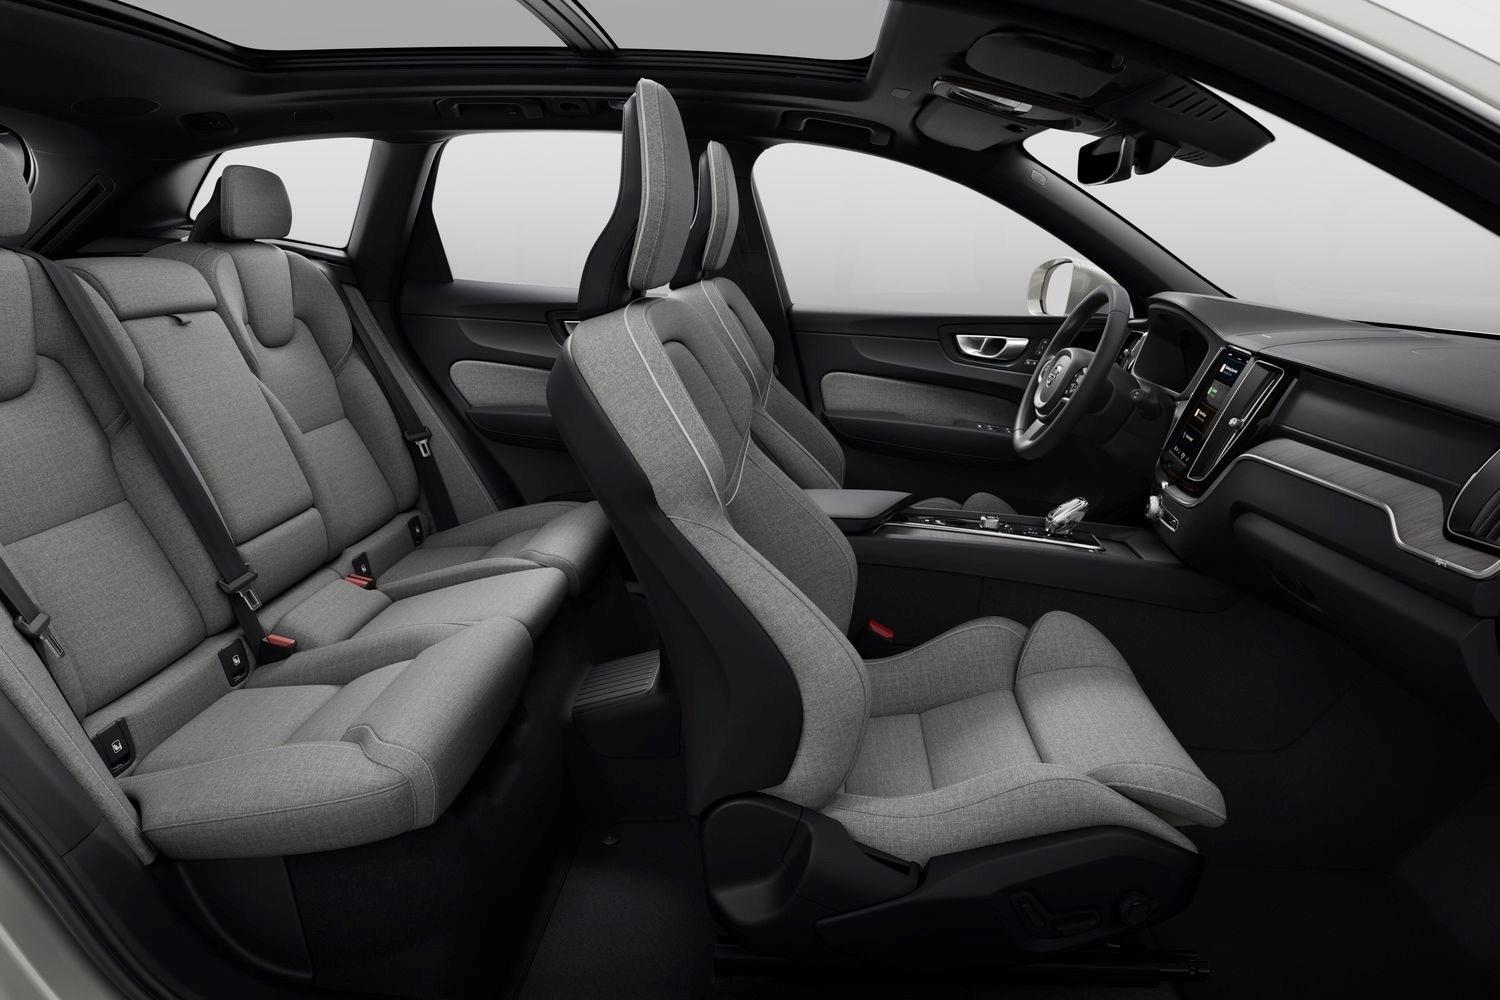 Interior view of the new Volvo XC60 Recharge front and rear passenger seats